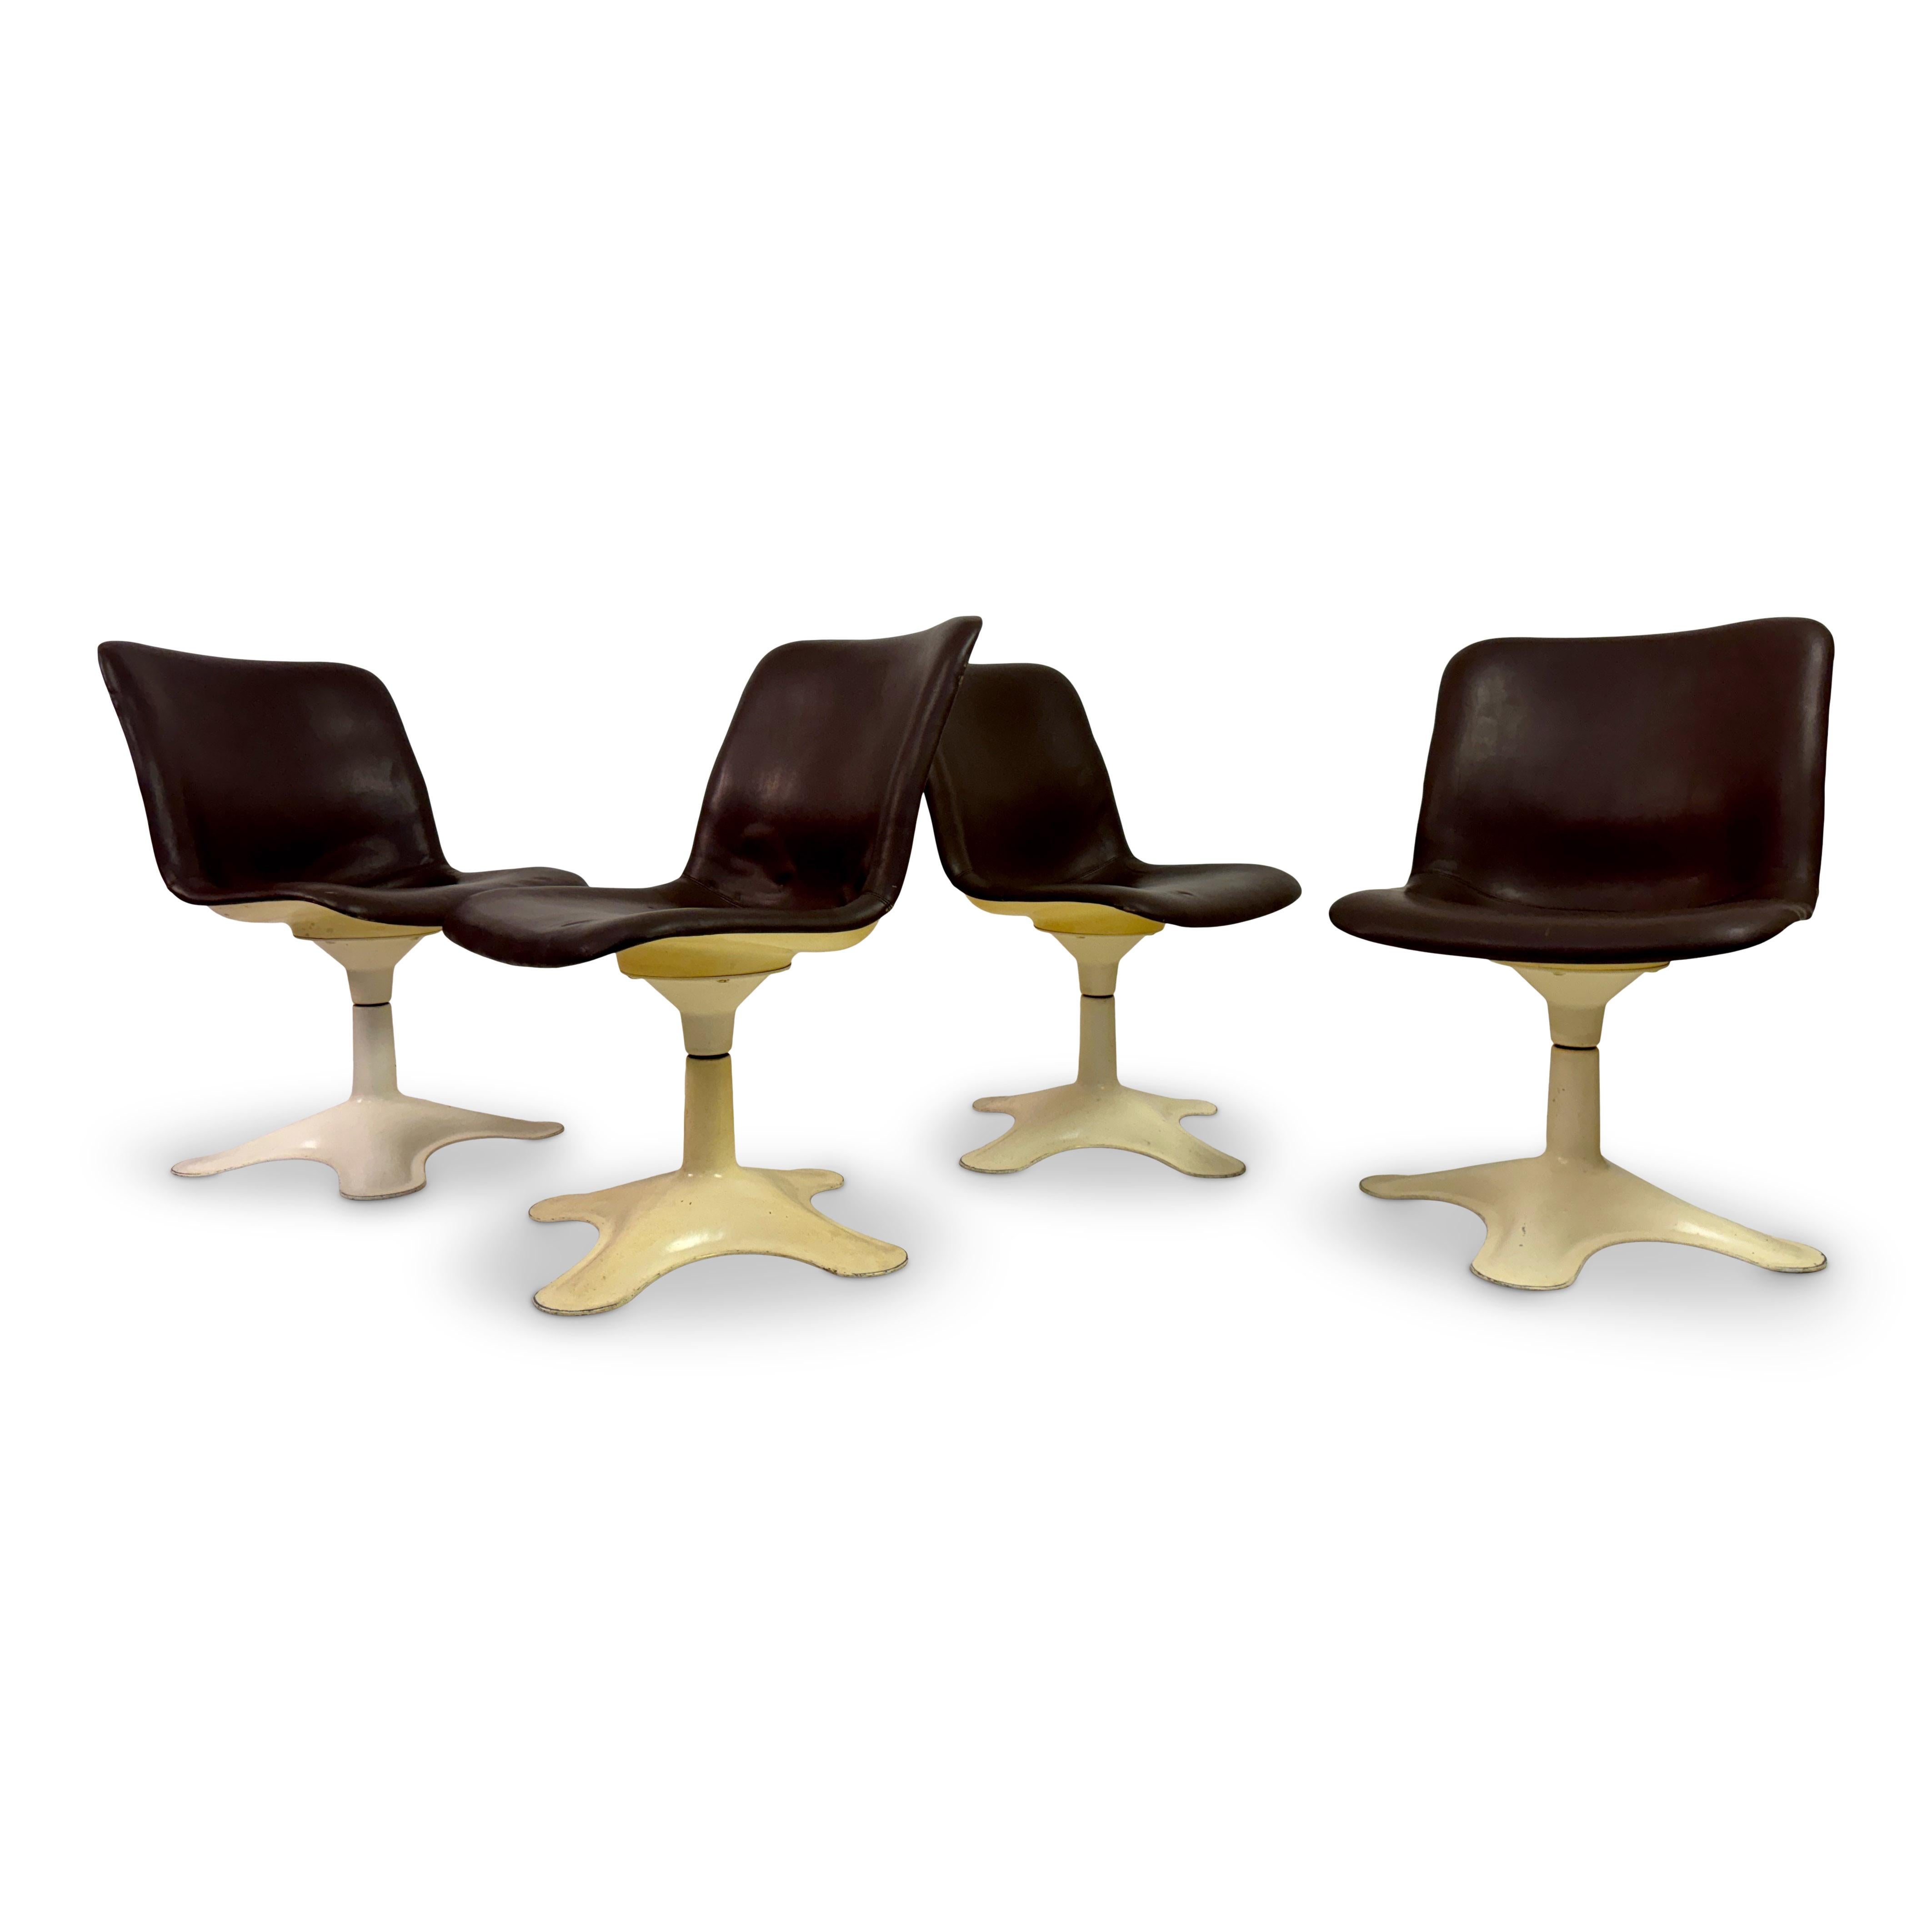 Four dining chairs

By Yrjö Kukkapuro

For Haimi

Model 415A

Brown leather seats

Fibreglass and organically shaped aluminium base

Discolouration to some of the chair backs. These can be refurbished if desired

Seat height 45cm

1960s Finland
